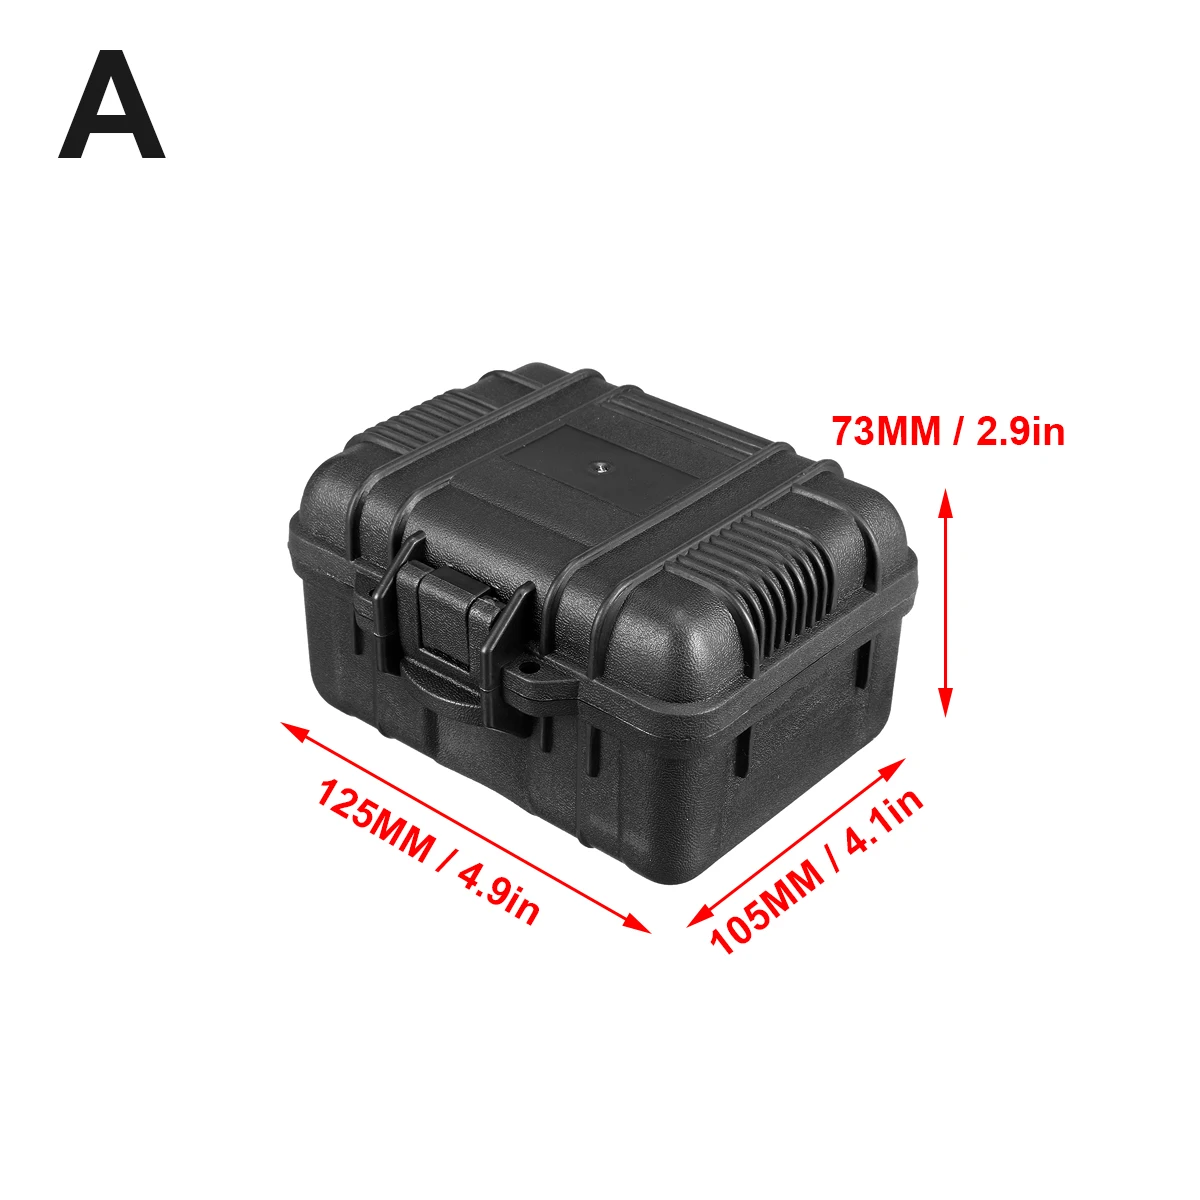 6 Sizes Waterproof Hard Carry Case Bag Tool Kits with Sponge Storage Box Safety Protector Organizer Hardware Toolbox tool tote bag Tool Storage Items